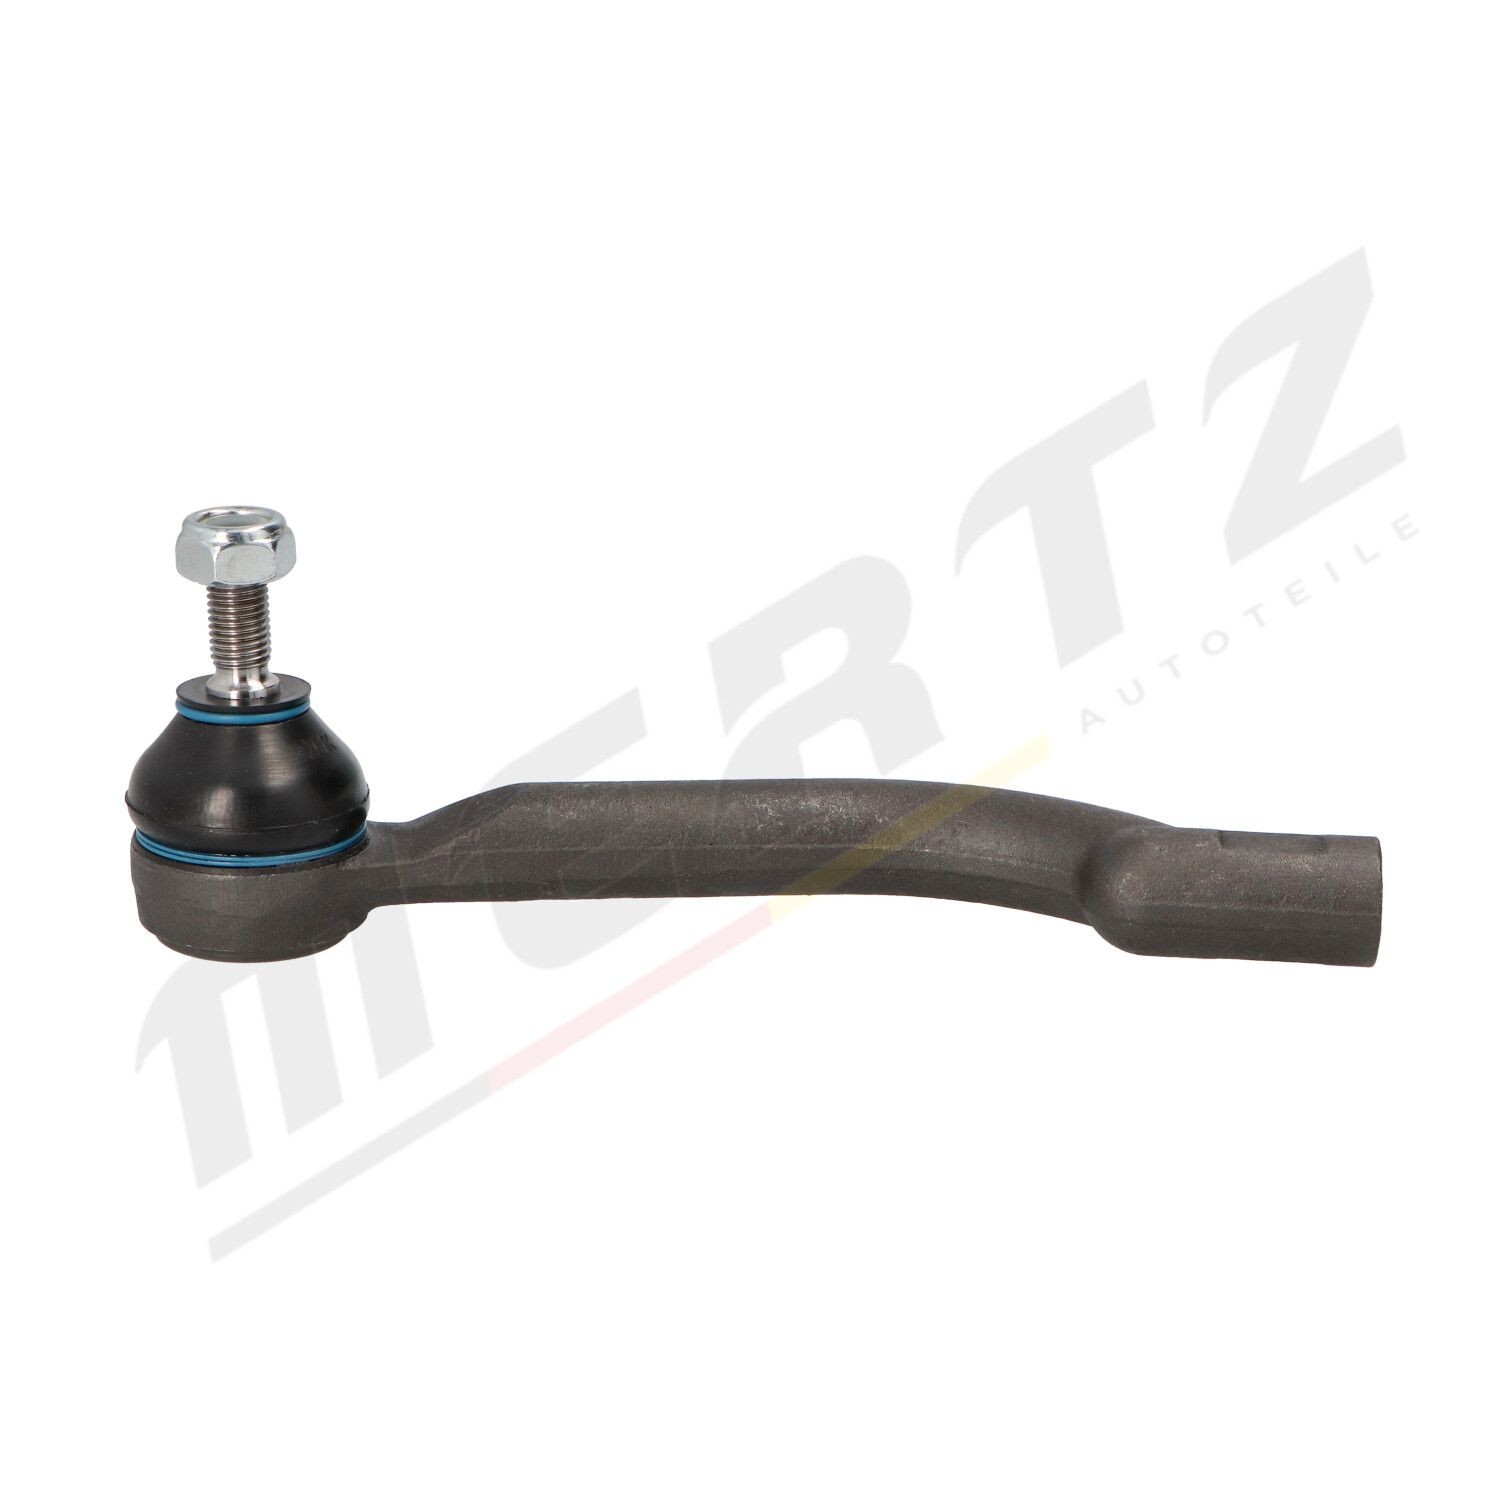 Track rod end MERTZ M-S0508 - Nissan QASHQAI Power steering spare parts order